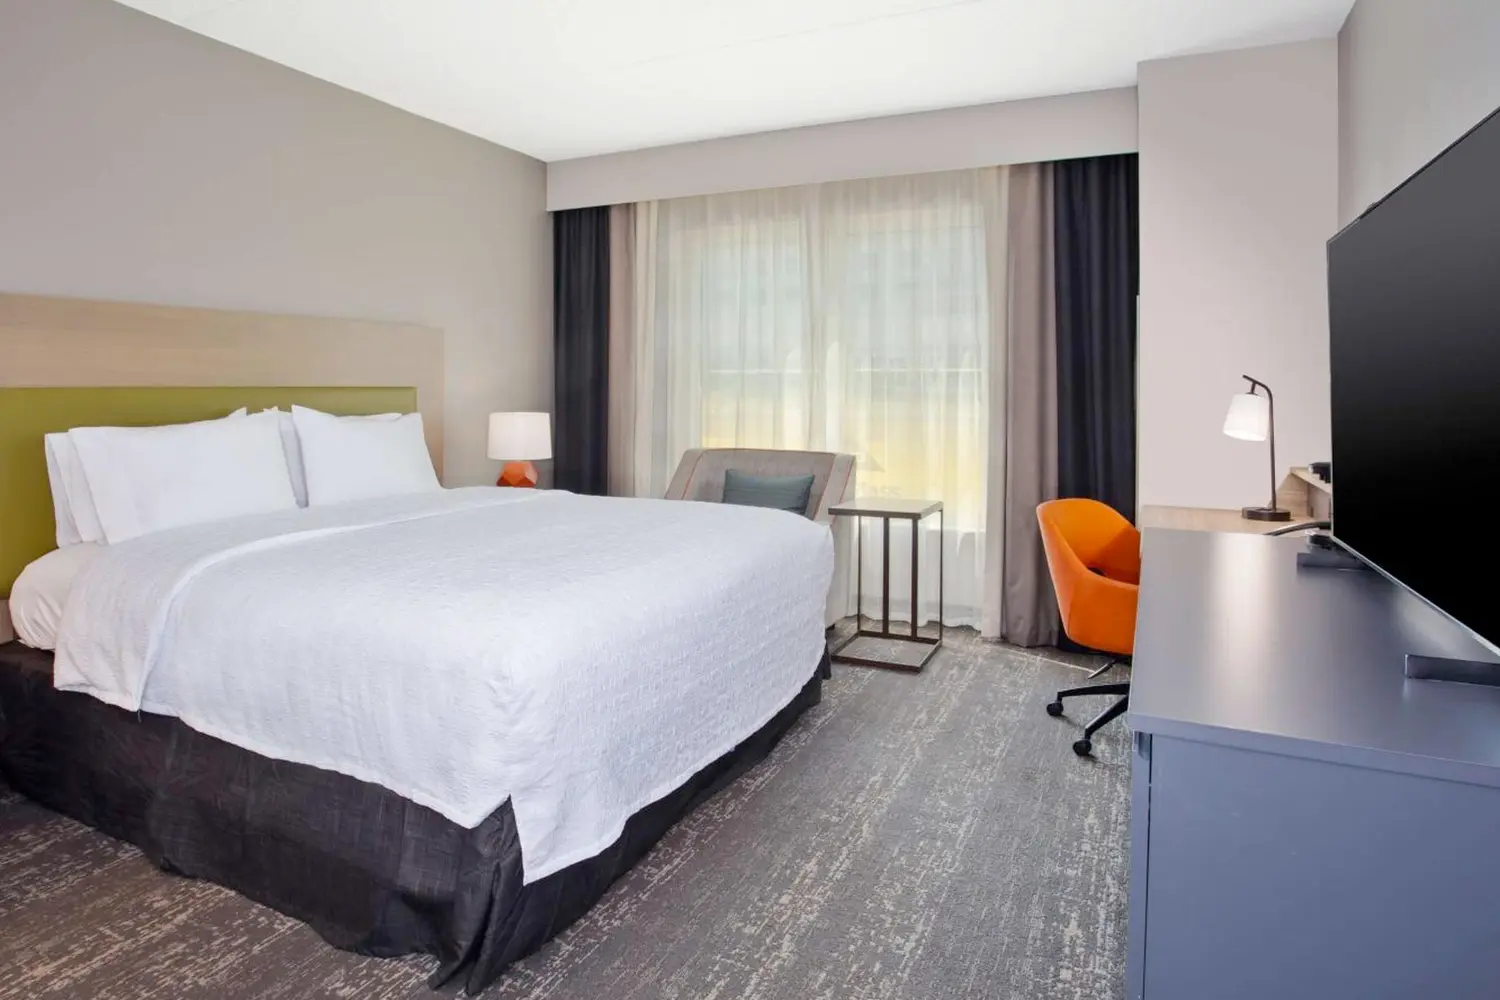 A room with a bed, couch, and table at Hampton Inn & Suites By Hilton- Newark Airport Elizabeth